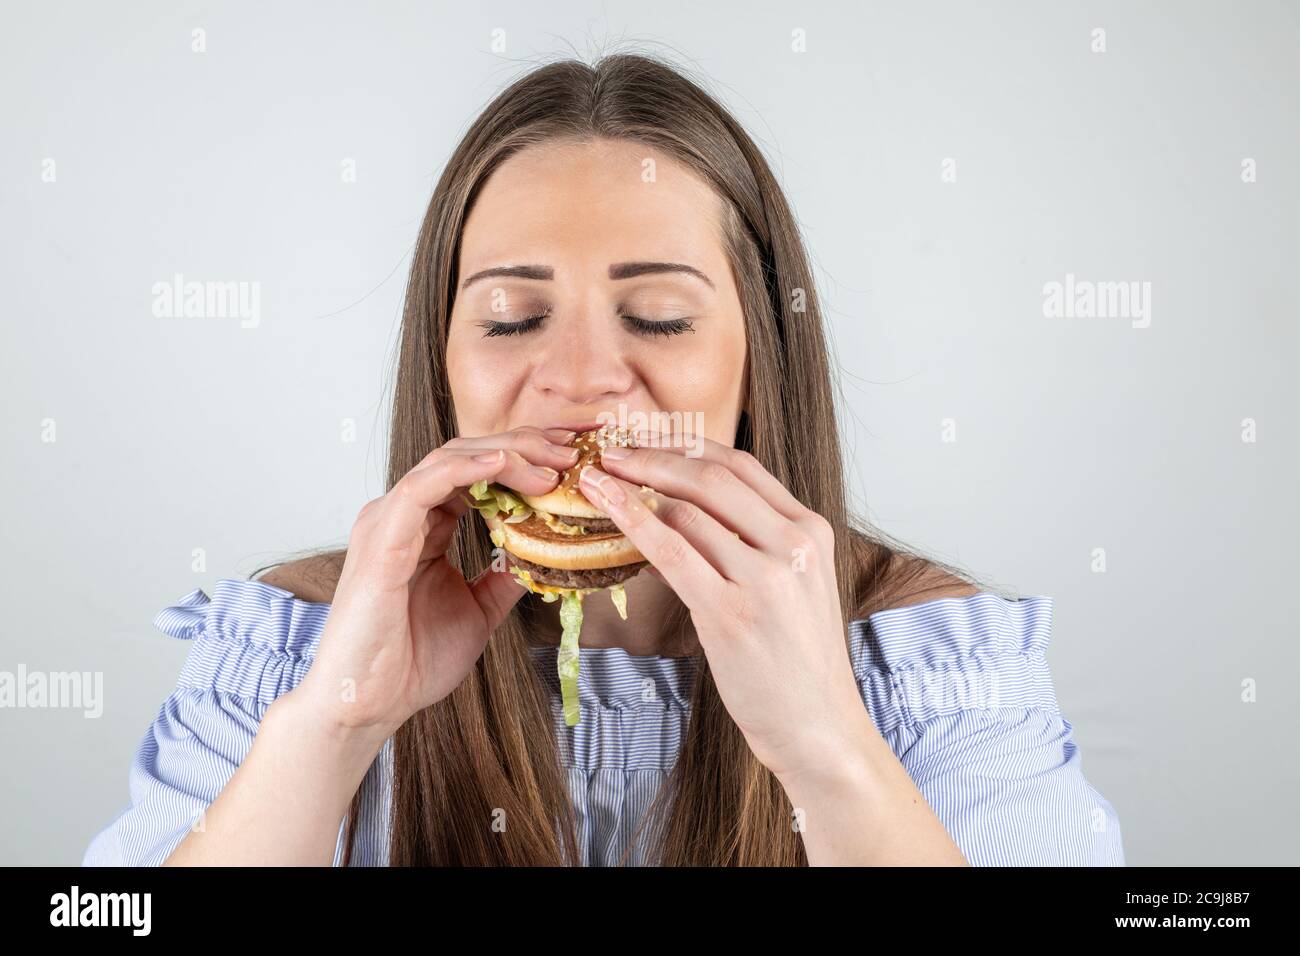 Portrait of a beautiful young woman eating a burger, isolated on white background Stock Photo